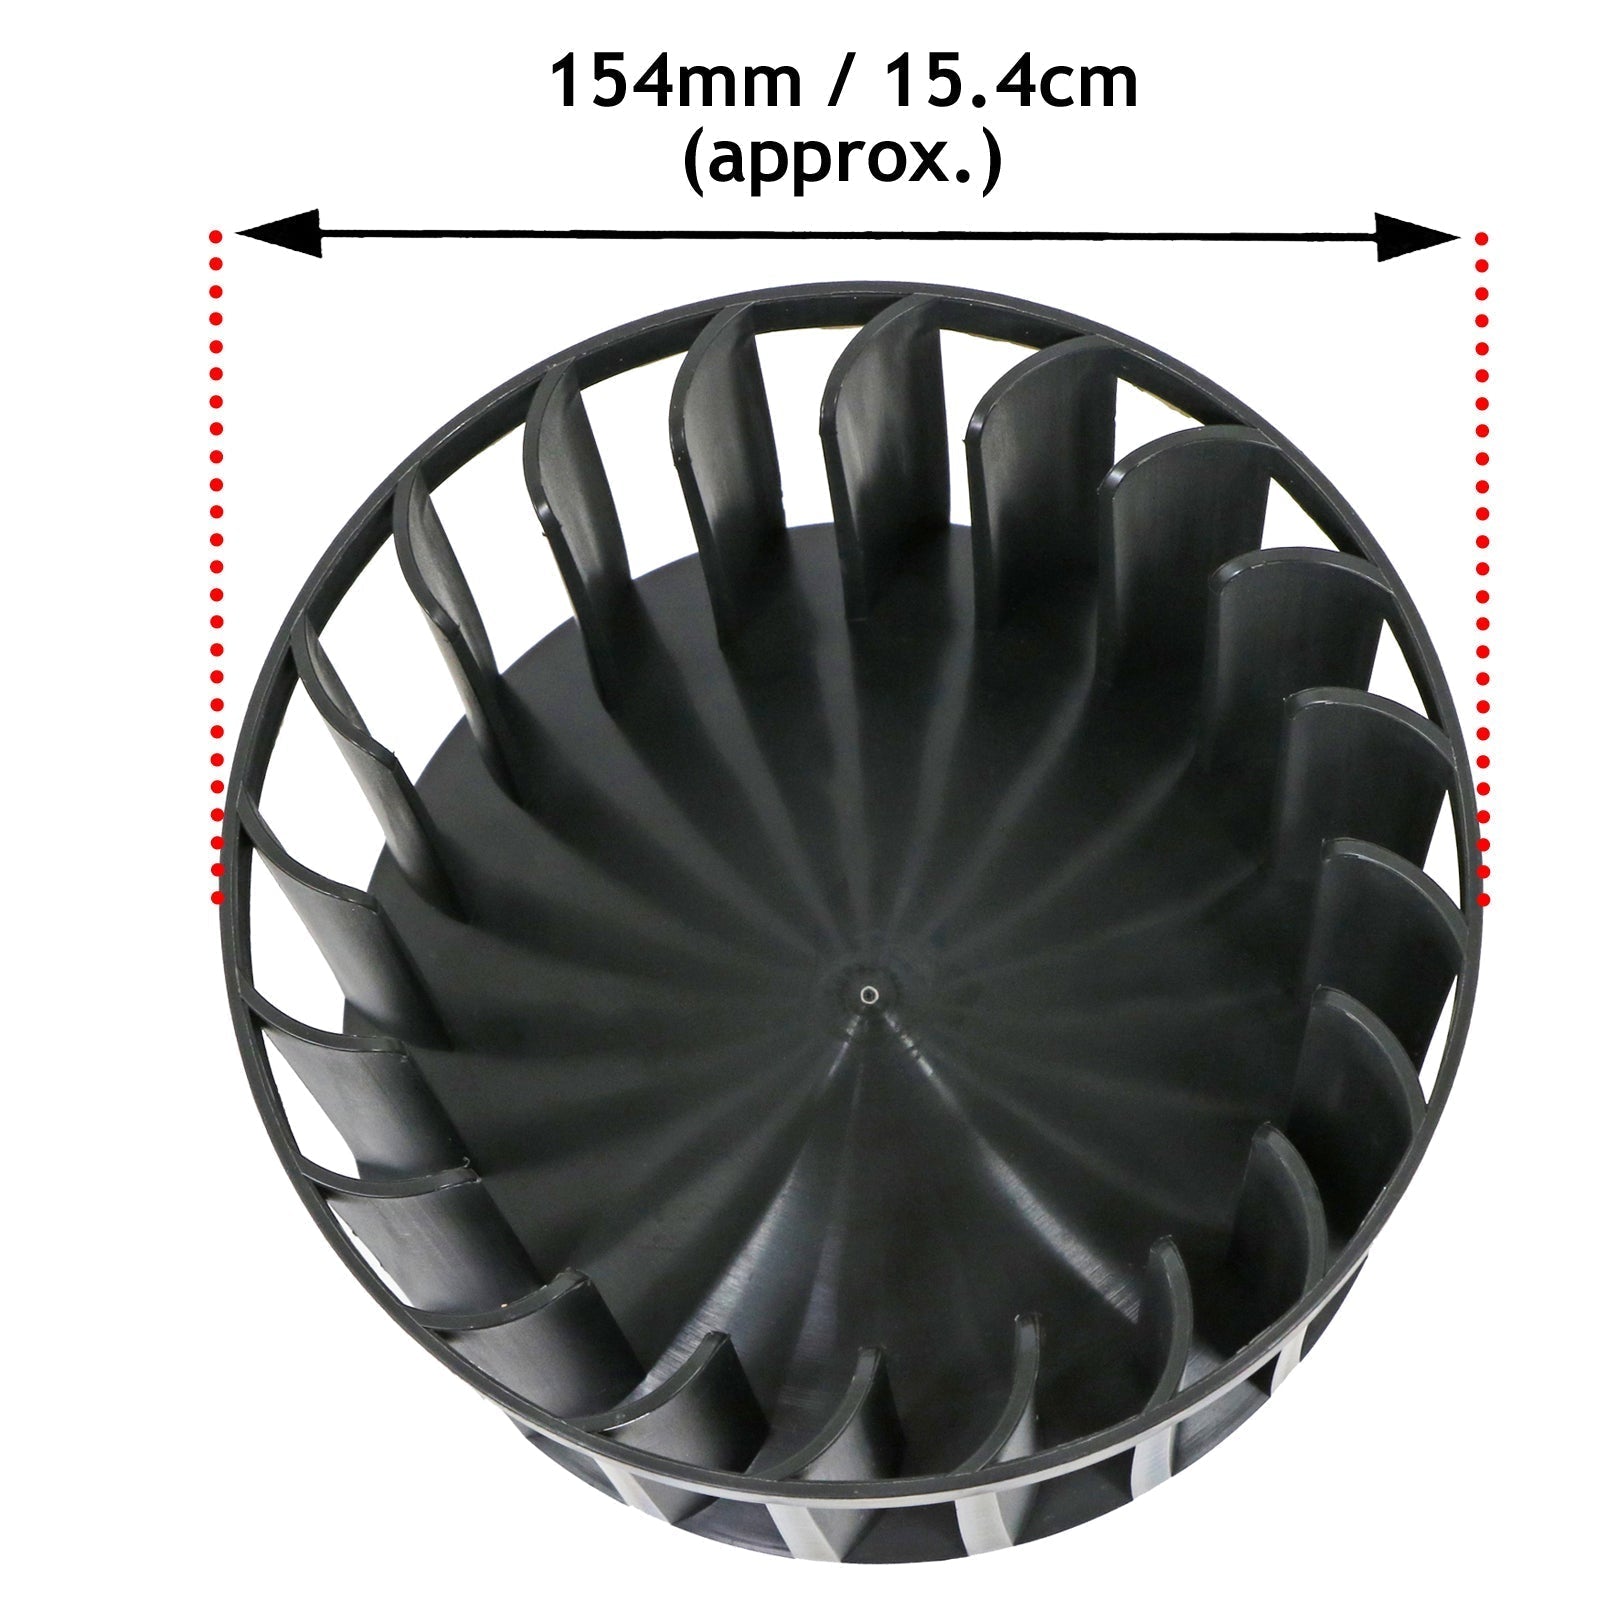 Fan Blade Assembly for Caple Tumble Dryer CL43 (0312 432 15001)